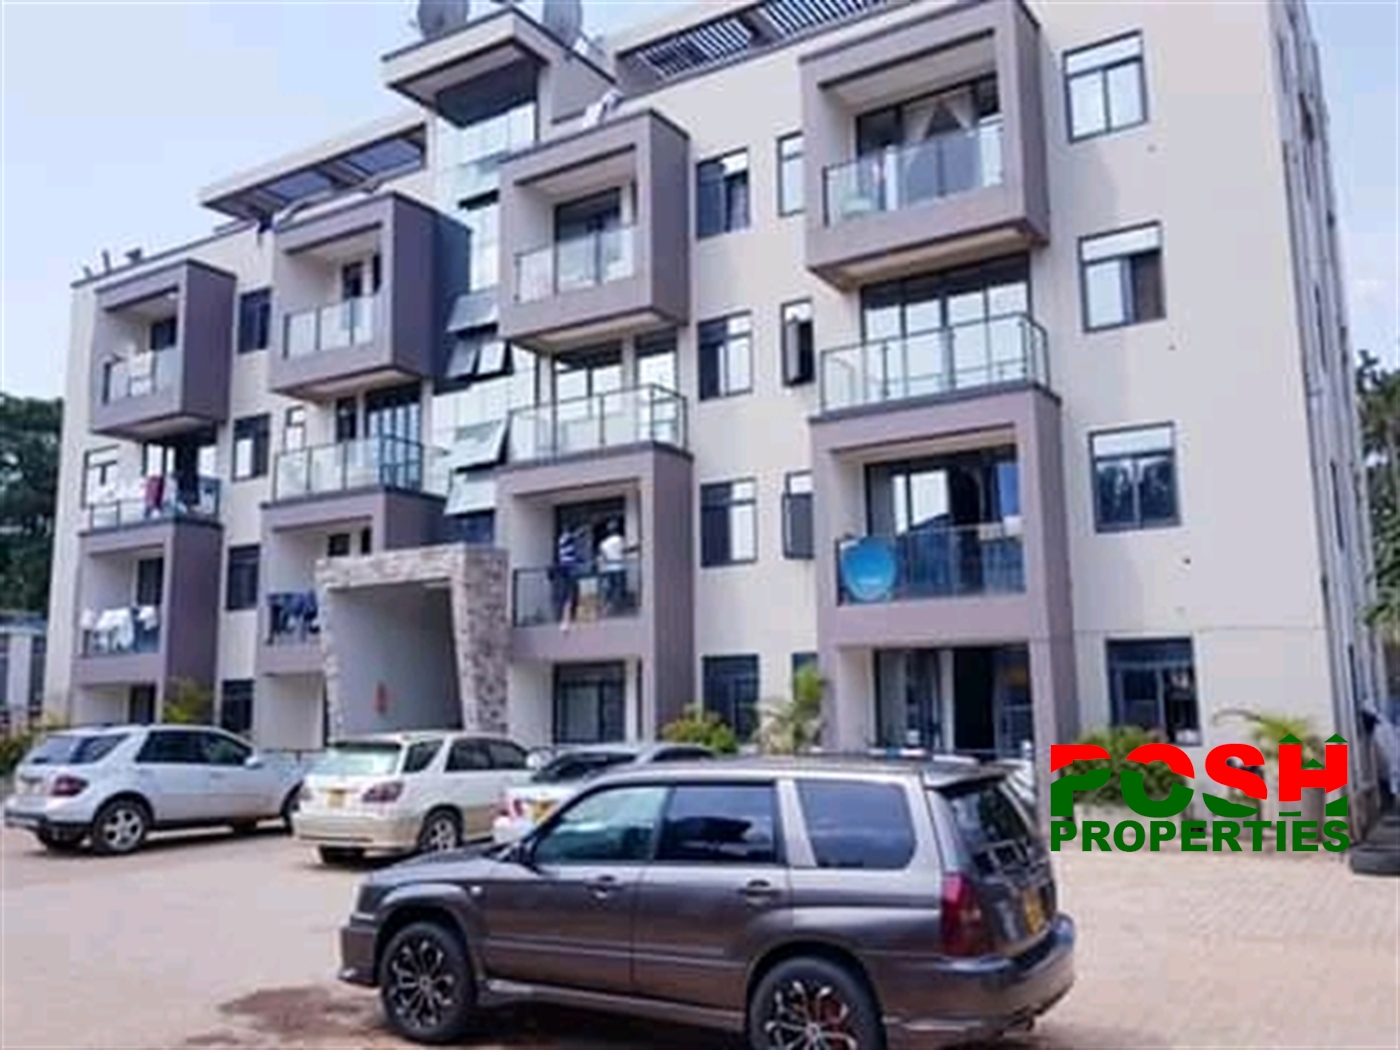 Apartment block for sale in Kampalacentral Kampala